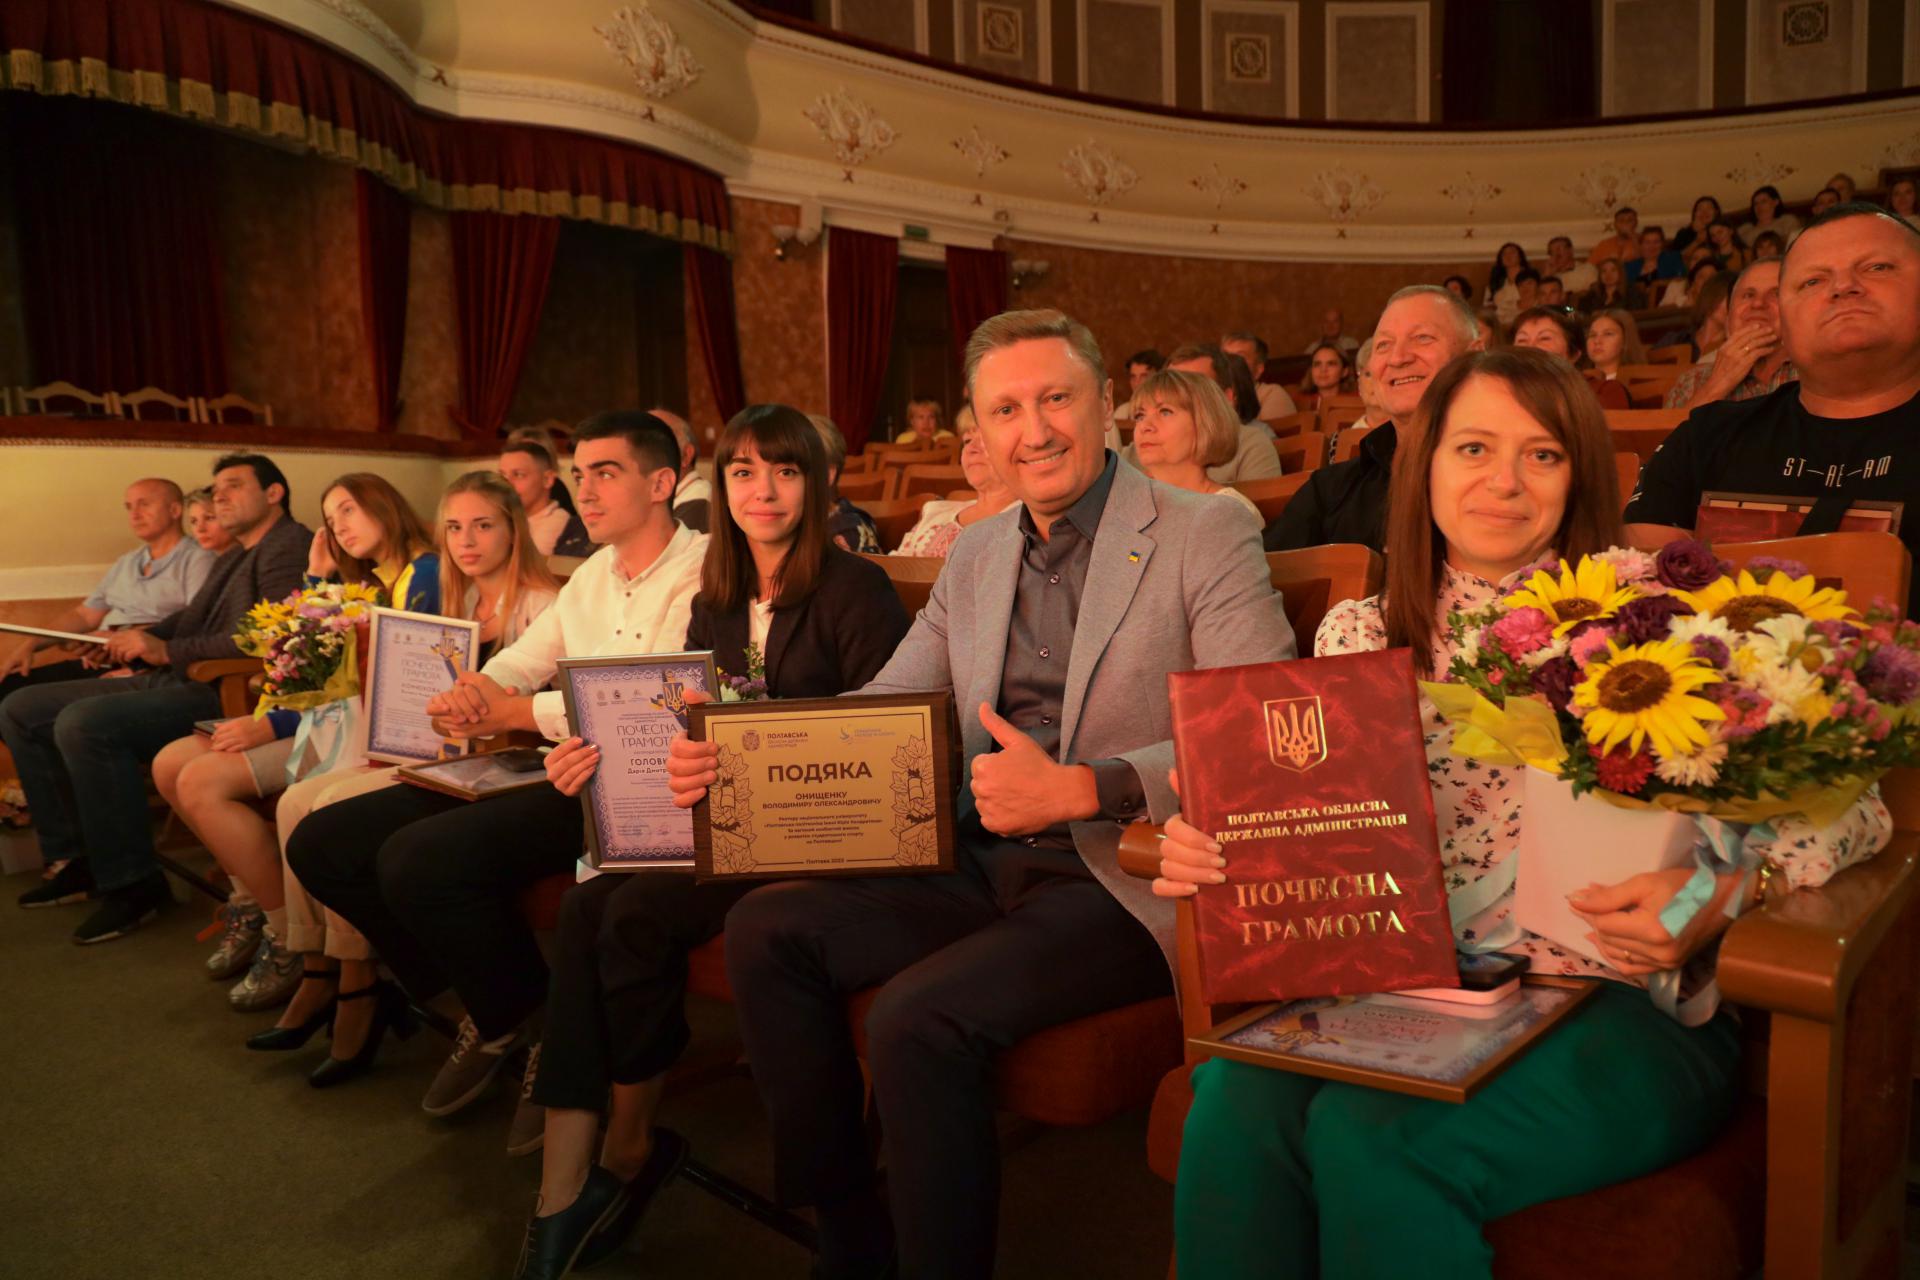 Scientists and students of Poltava Polytechnic received awards on the Day of Physical Culture and Sports